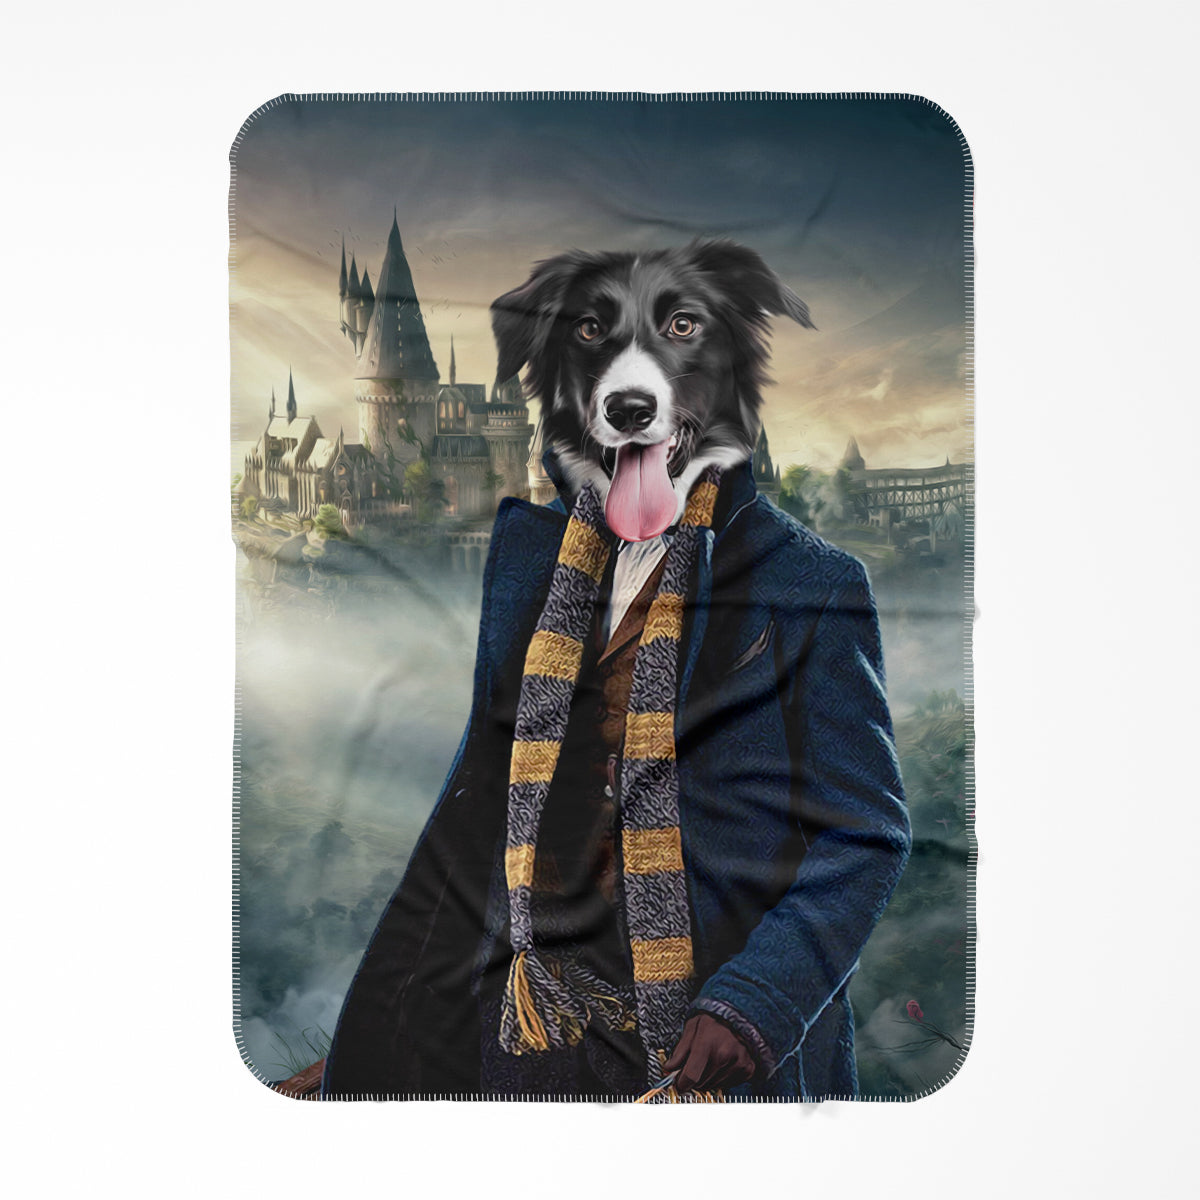 The Clever Wizard (Harry Potter Inspired) Paw & Glory, paw and glory, blanket with your dog on it, pet blanket custom, pet art dog head blanket, best pet photo blanket, pet art blanket, dog picture blanket, Pet Portraits blanket,